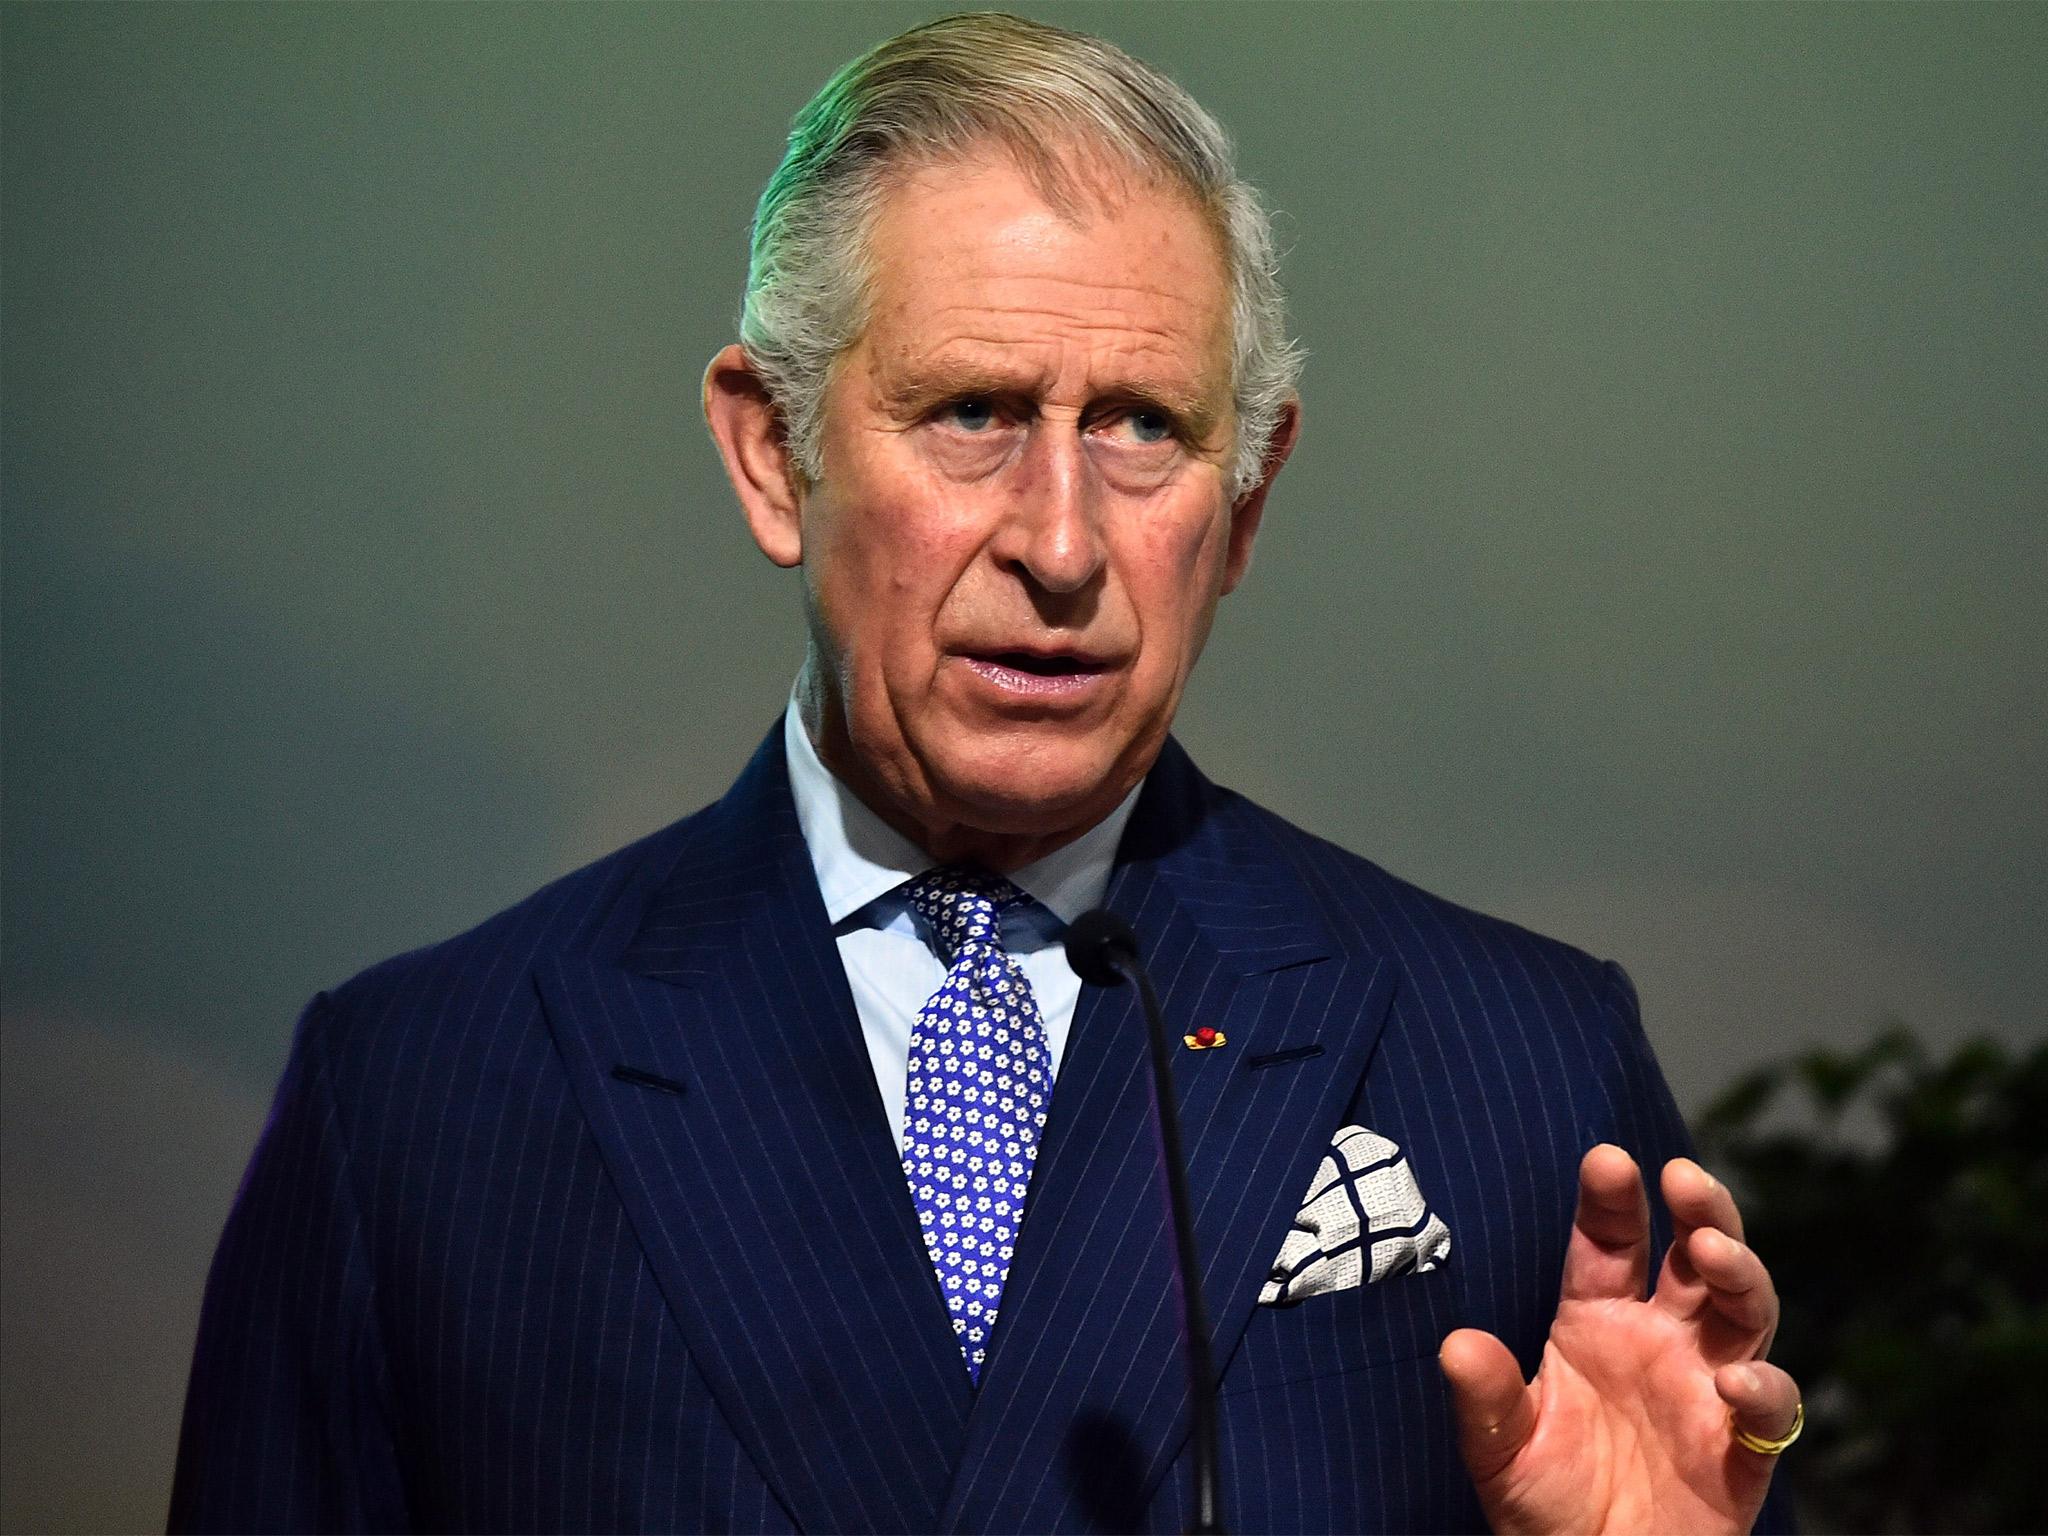 Prince Charles speaking in France on Tuesday. A planned interview there was cancelled after Channel 4 refused to accede to the conditions demanded